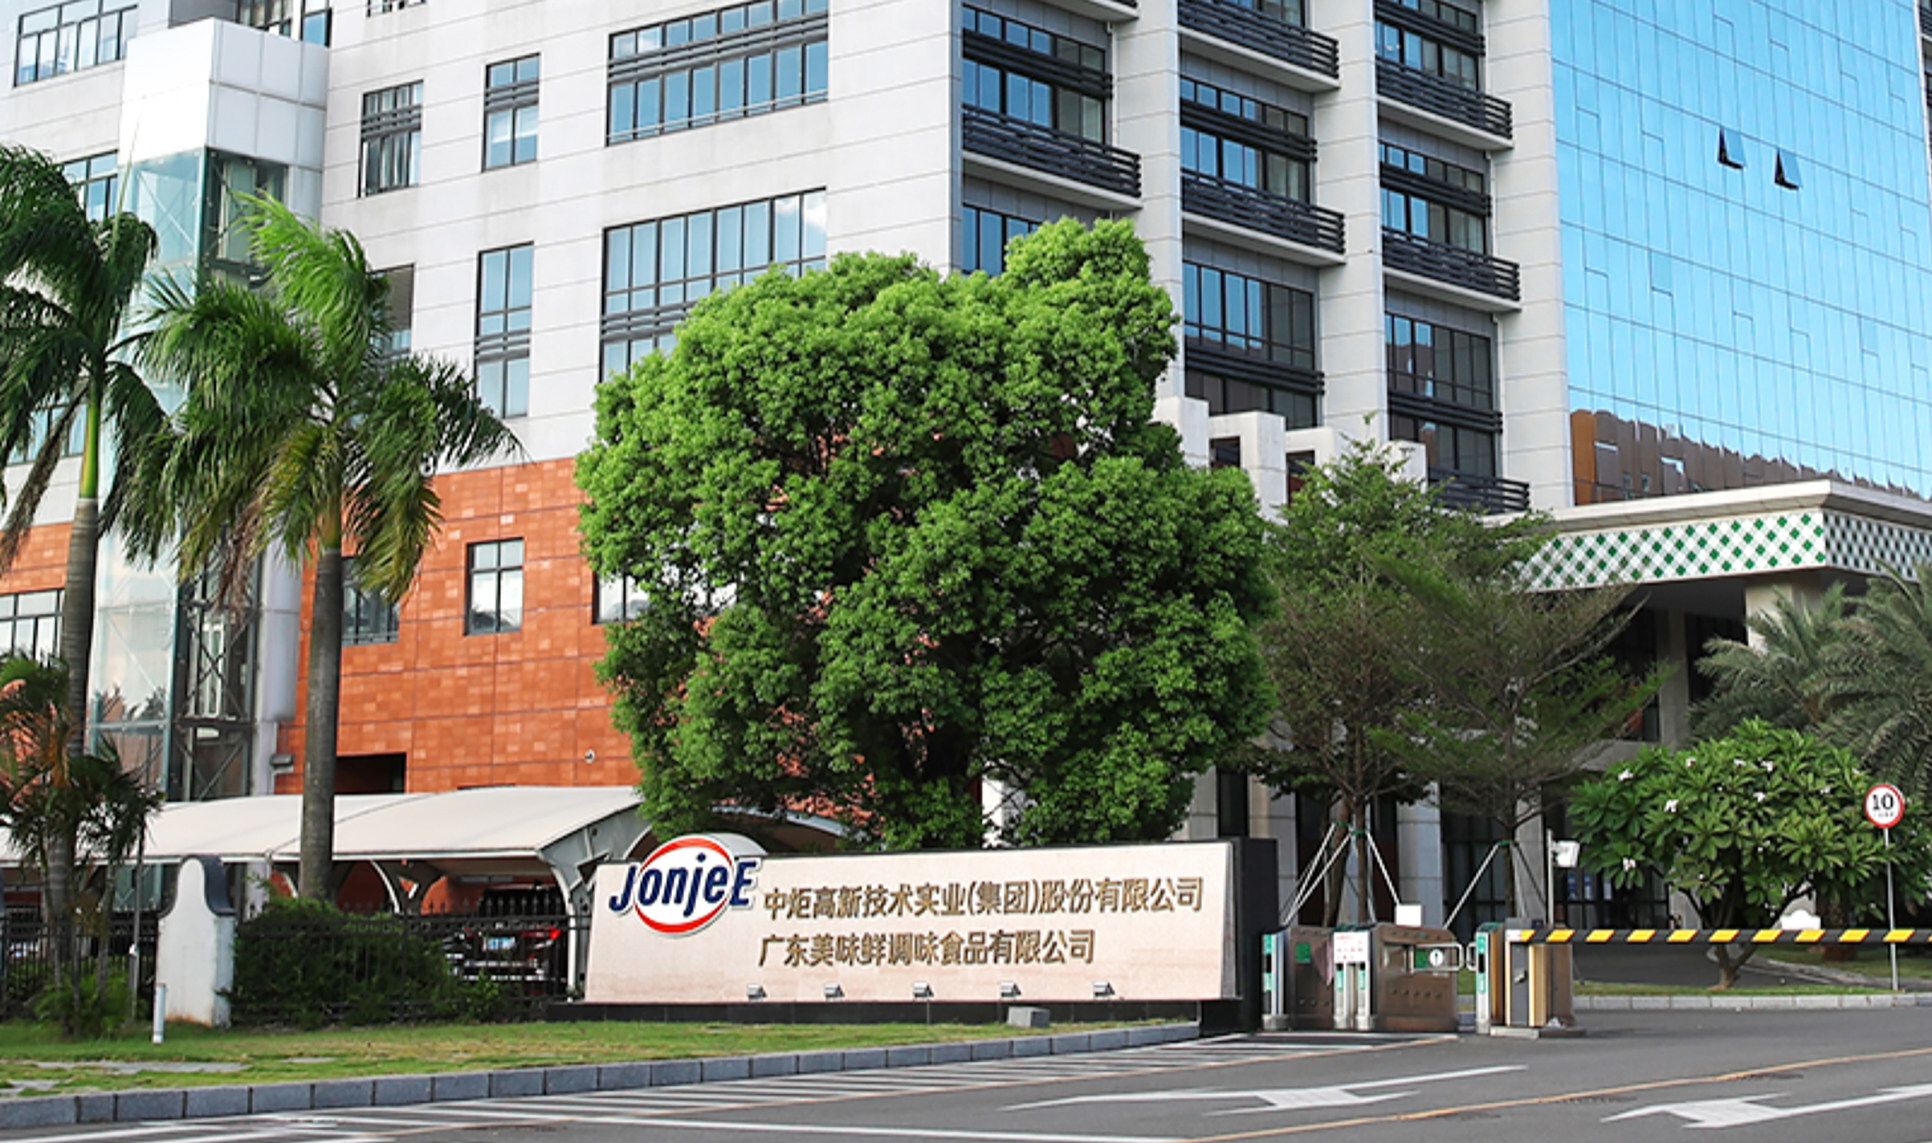 Jonjee’s headquarters in Zhongshan, Guangdong province. The firm produces food seasoning from soybean sauce to edible oil and chicken essence. Photo: Handout